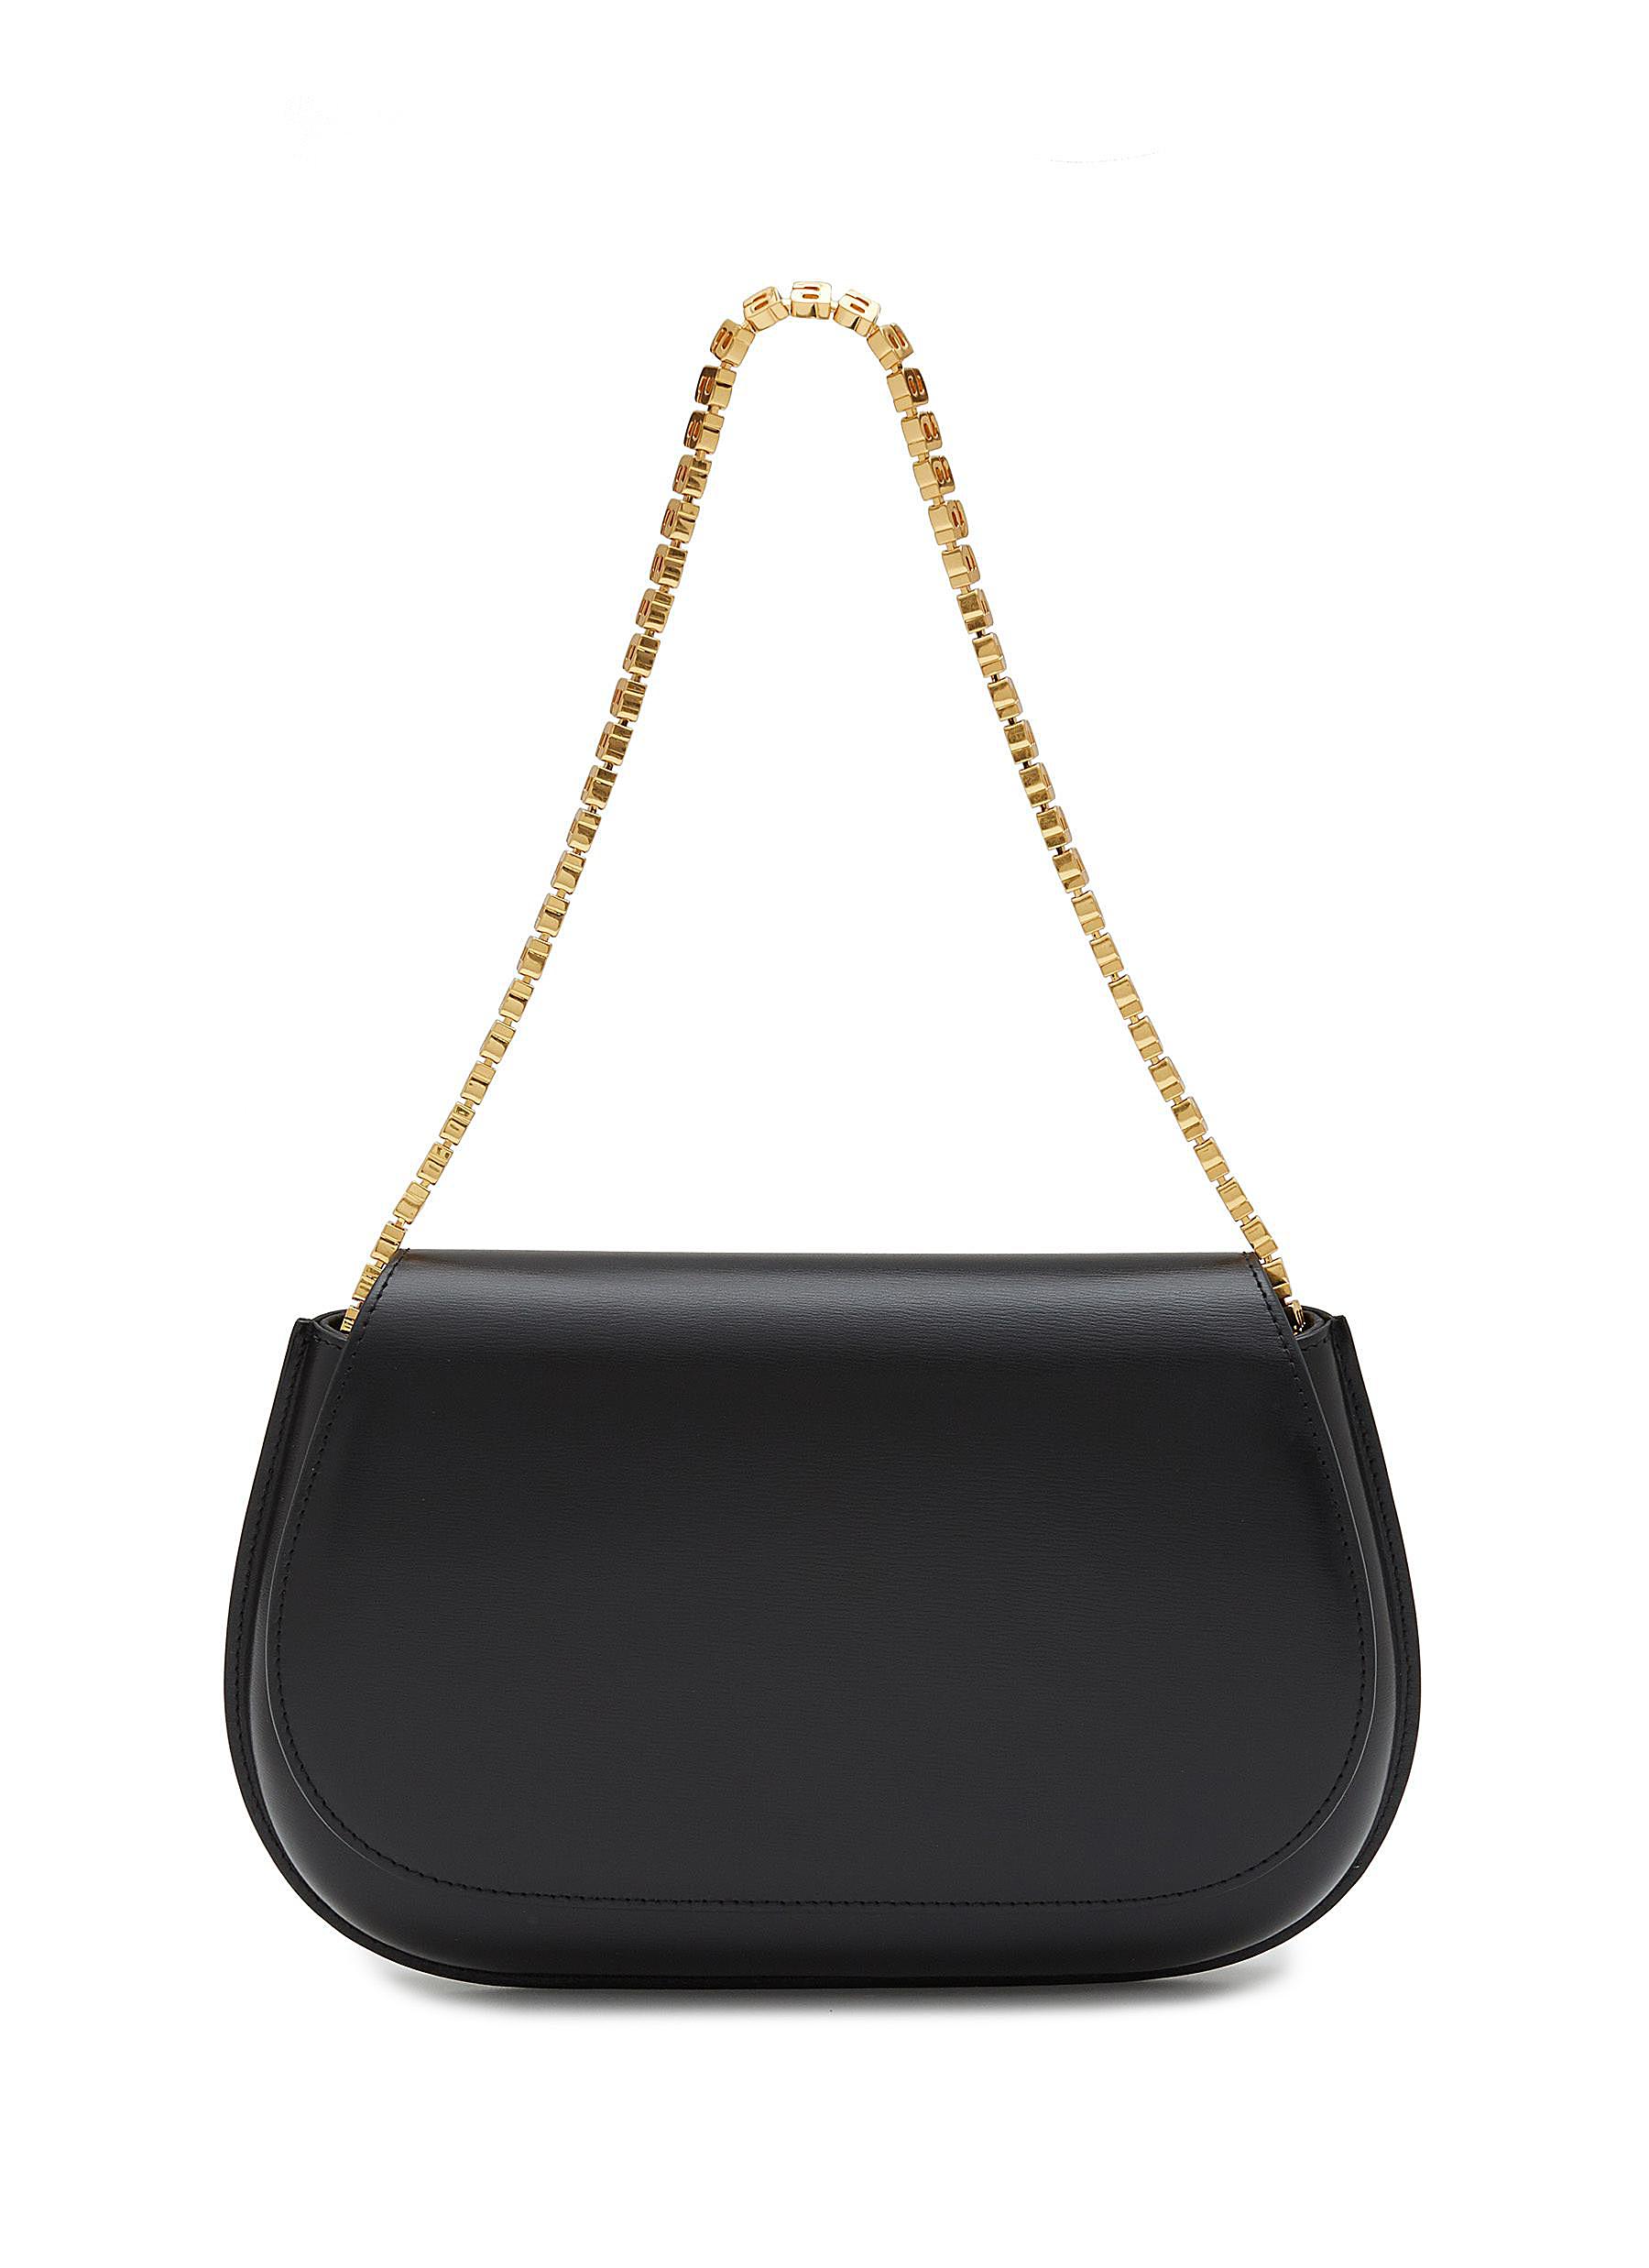 Crest ’A’ Chain Leather Bag